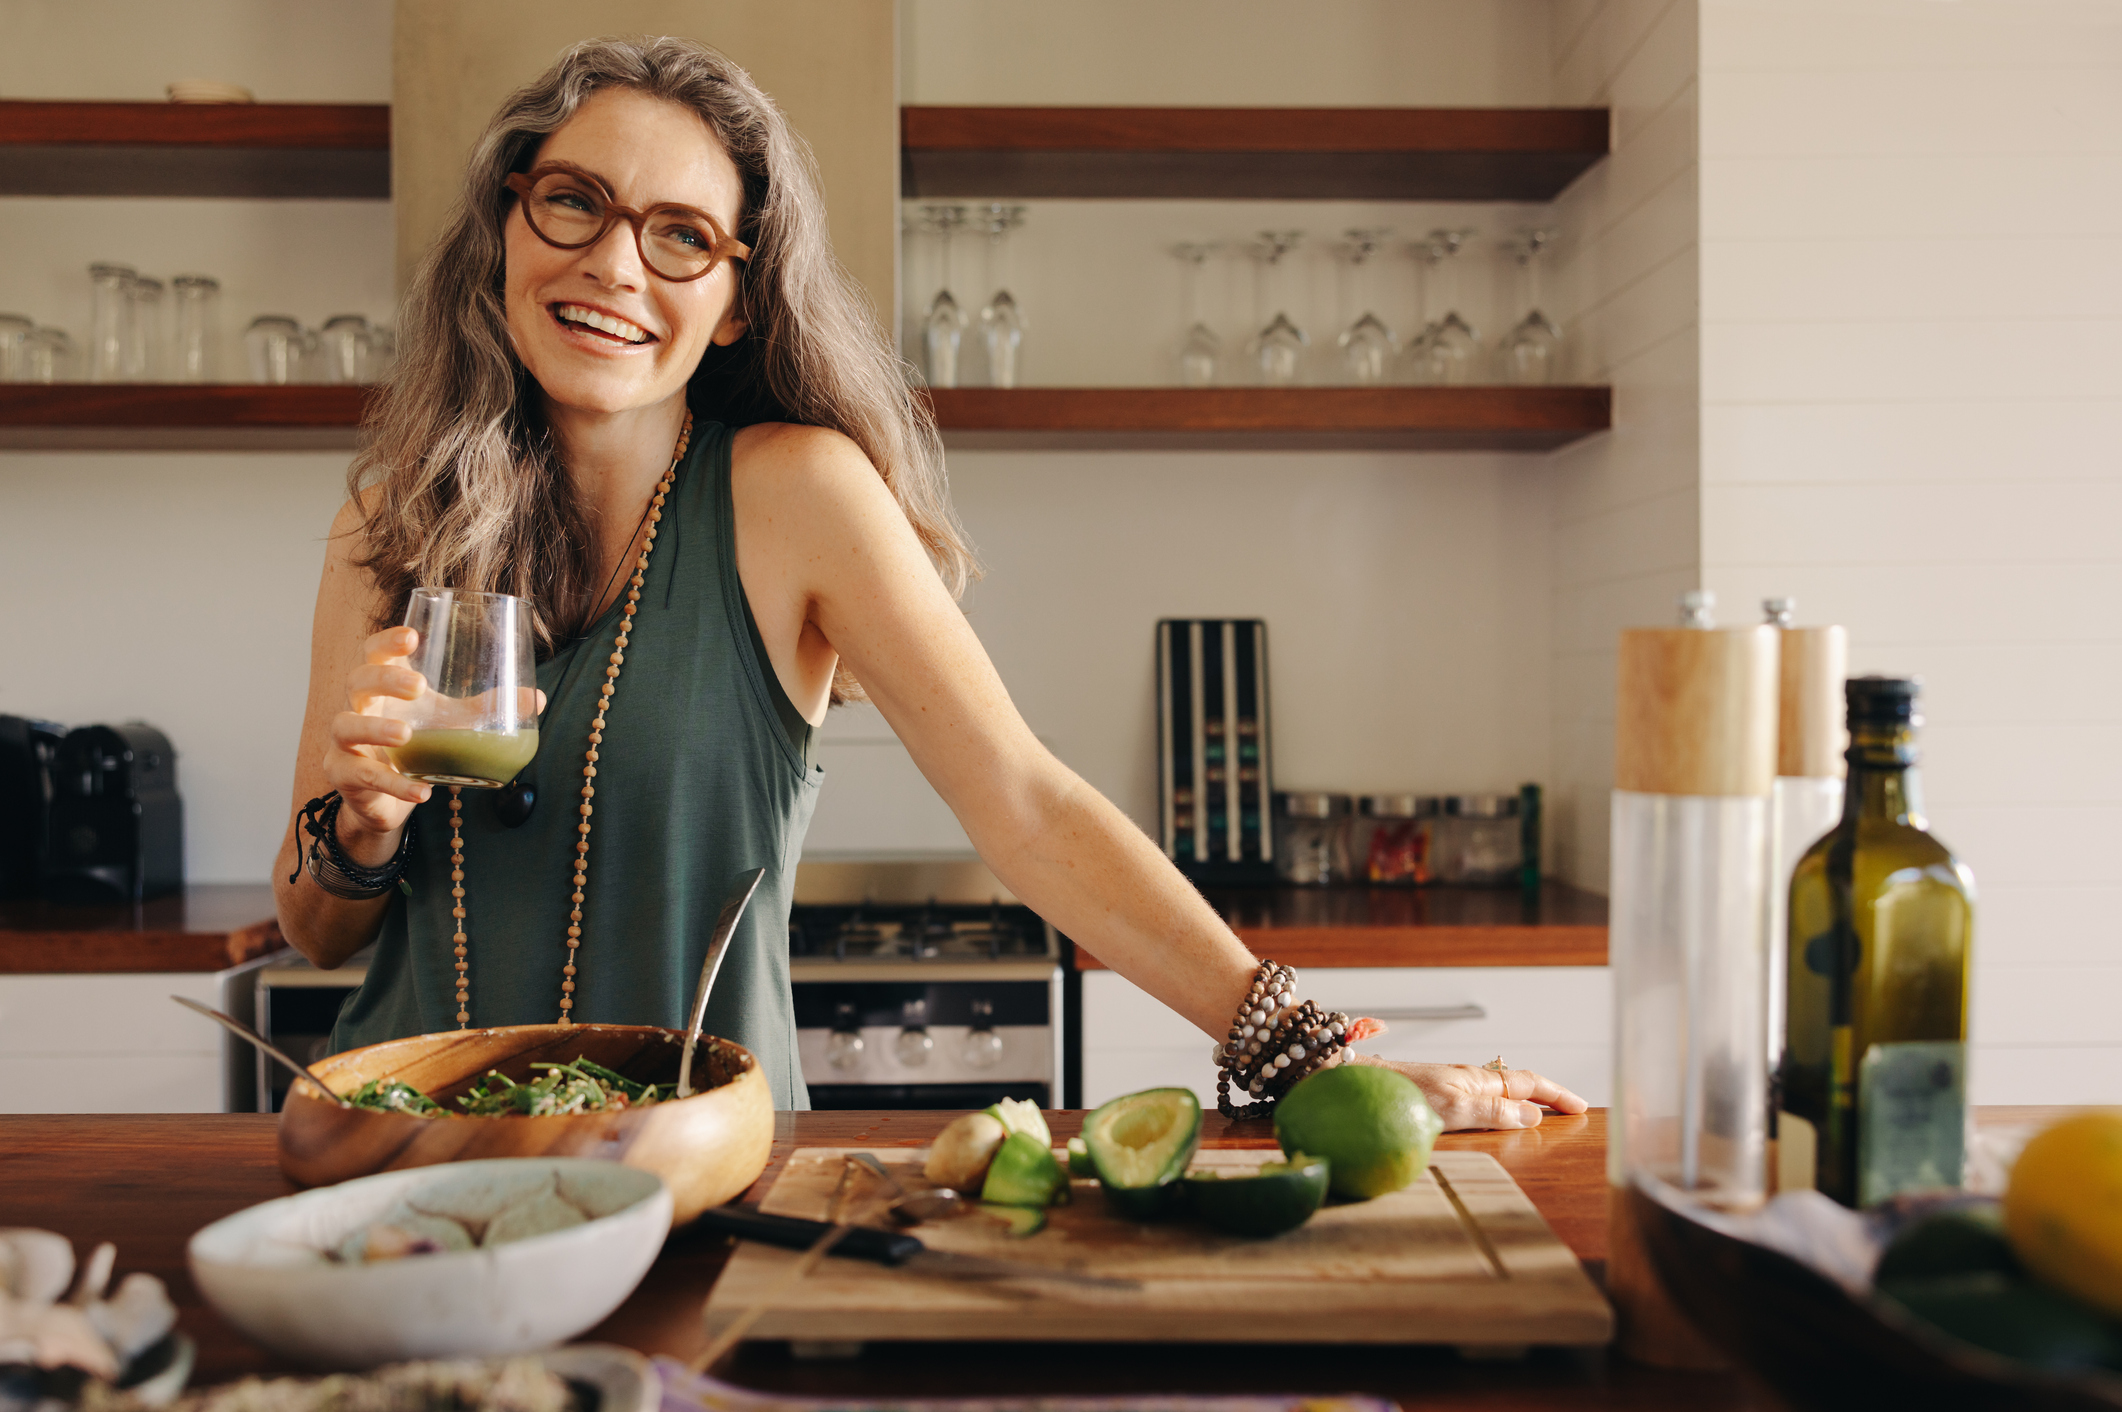 The one thing women should eat for healthy aging